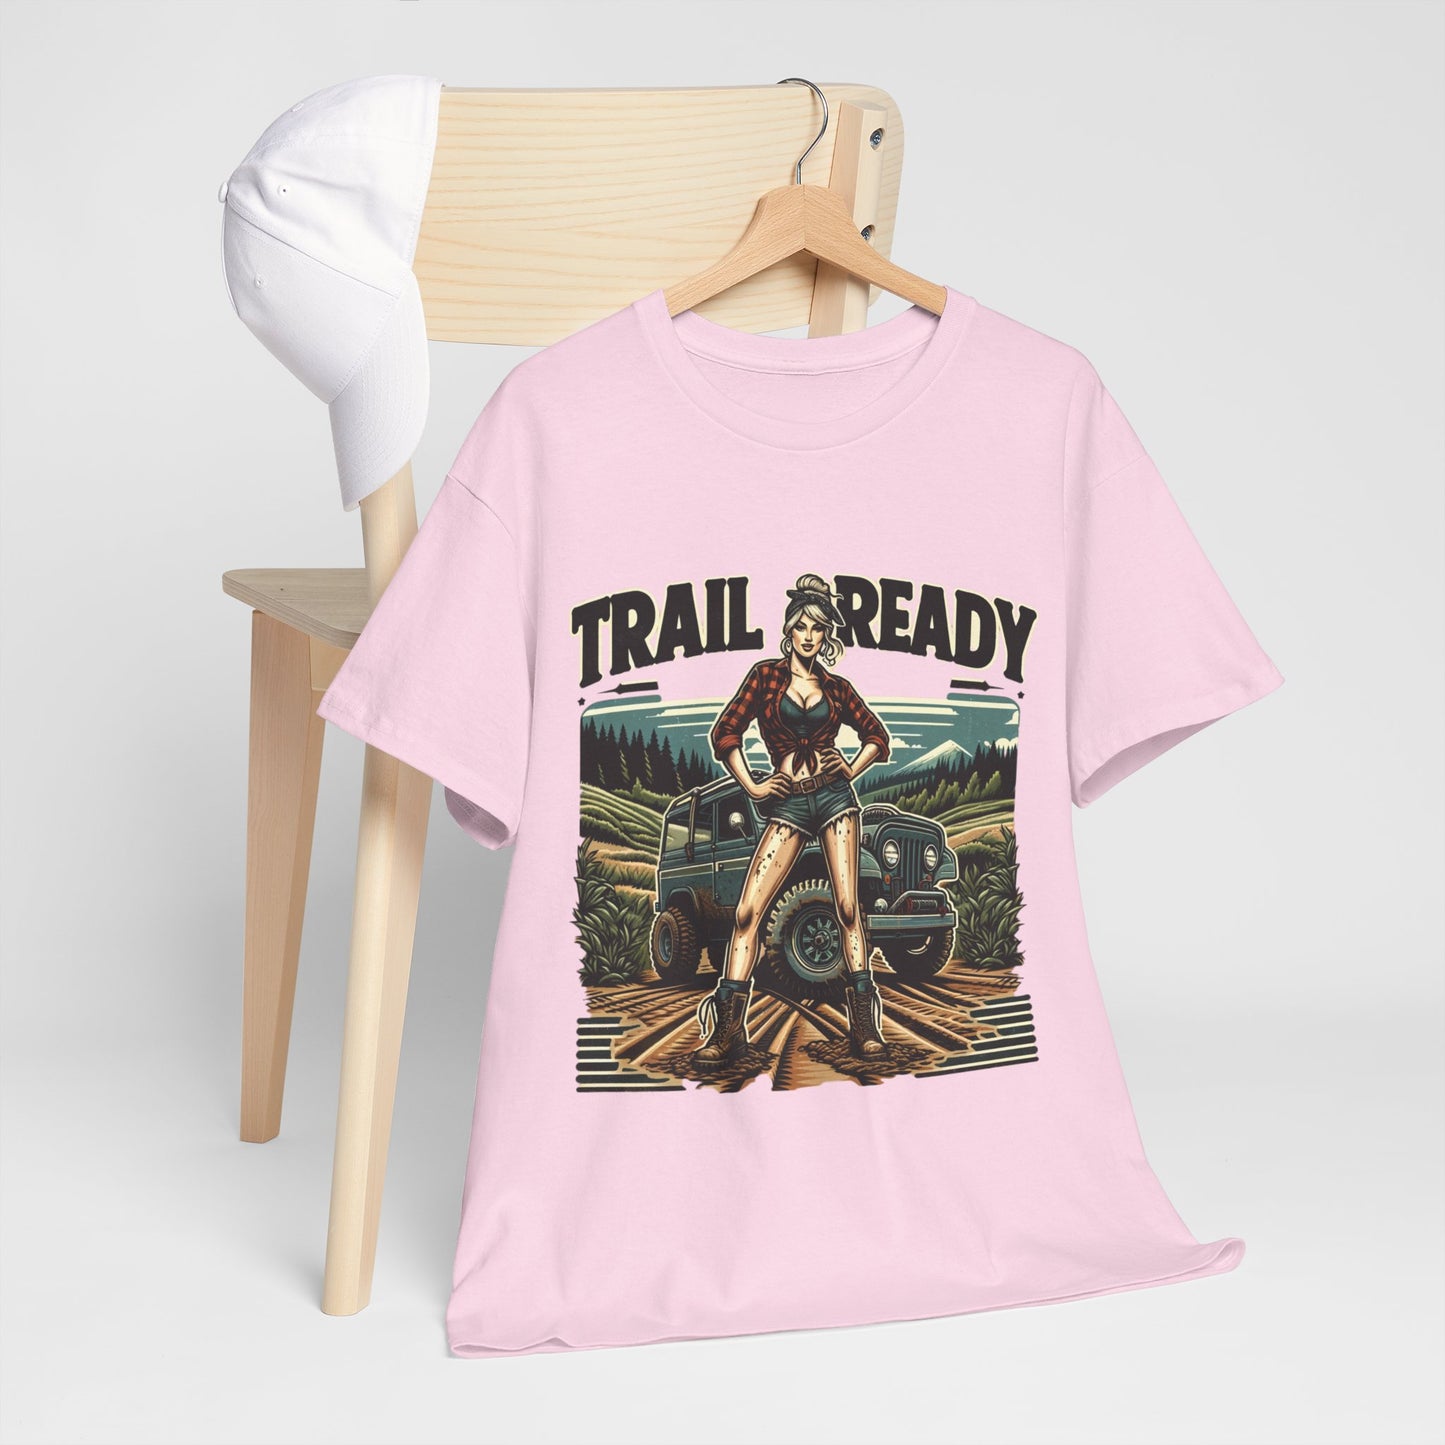 Buy 'Trail Ready' Vintage Off-Road T-Shirt - Embrace Adventure with Pin-Up Style!